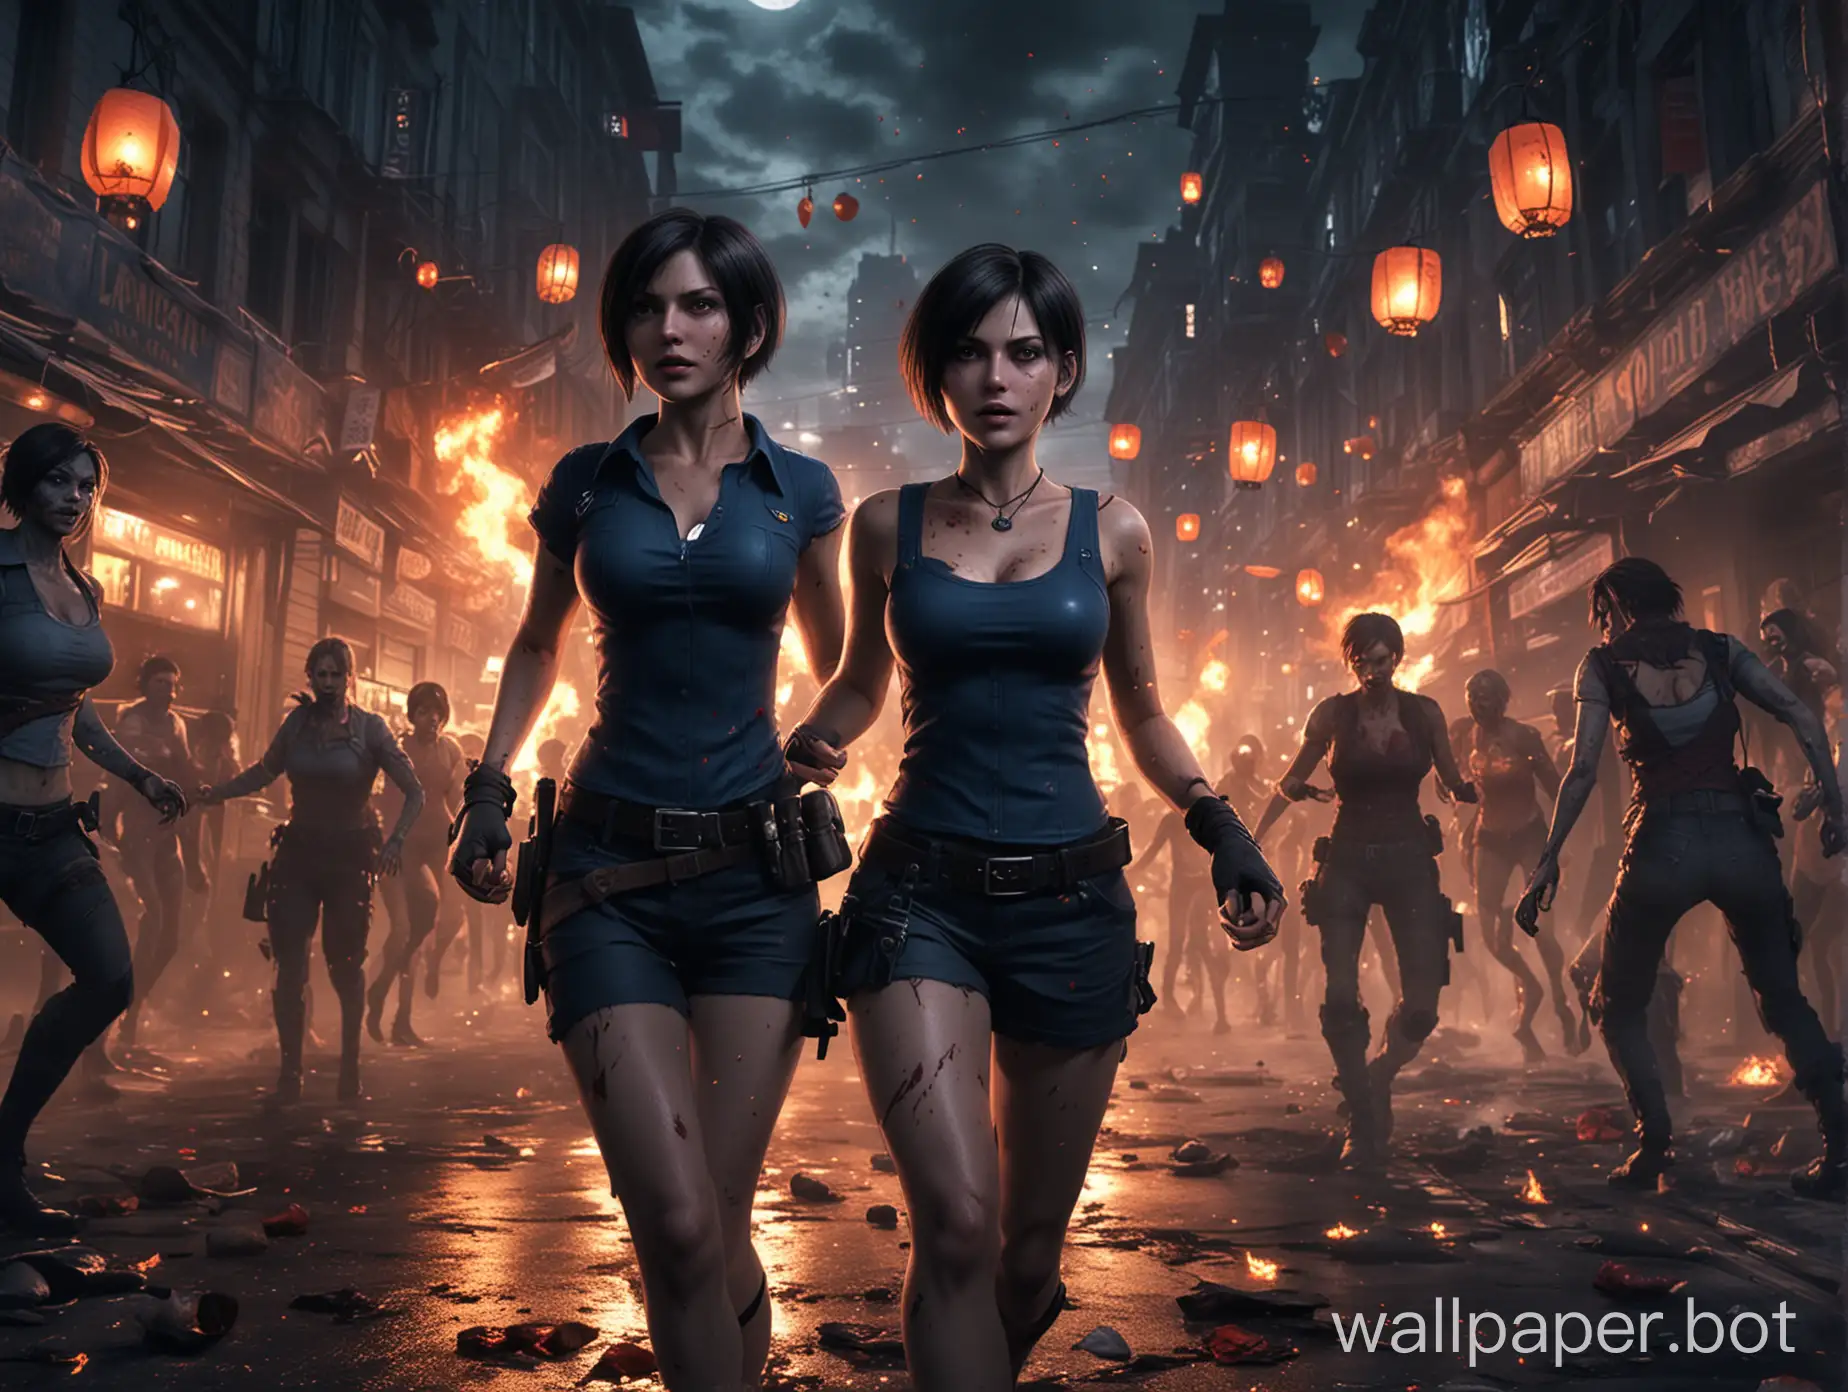 Jill-Valentine-and-Ada-Wong-Escaping-Zombies-in-a-Night-City